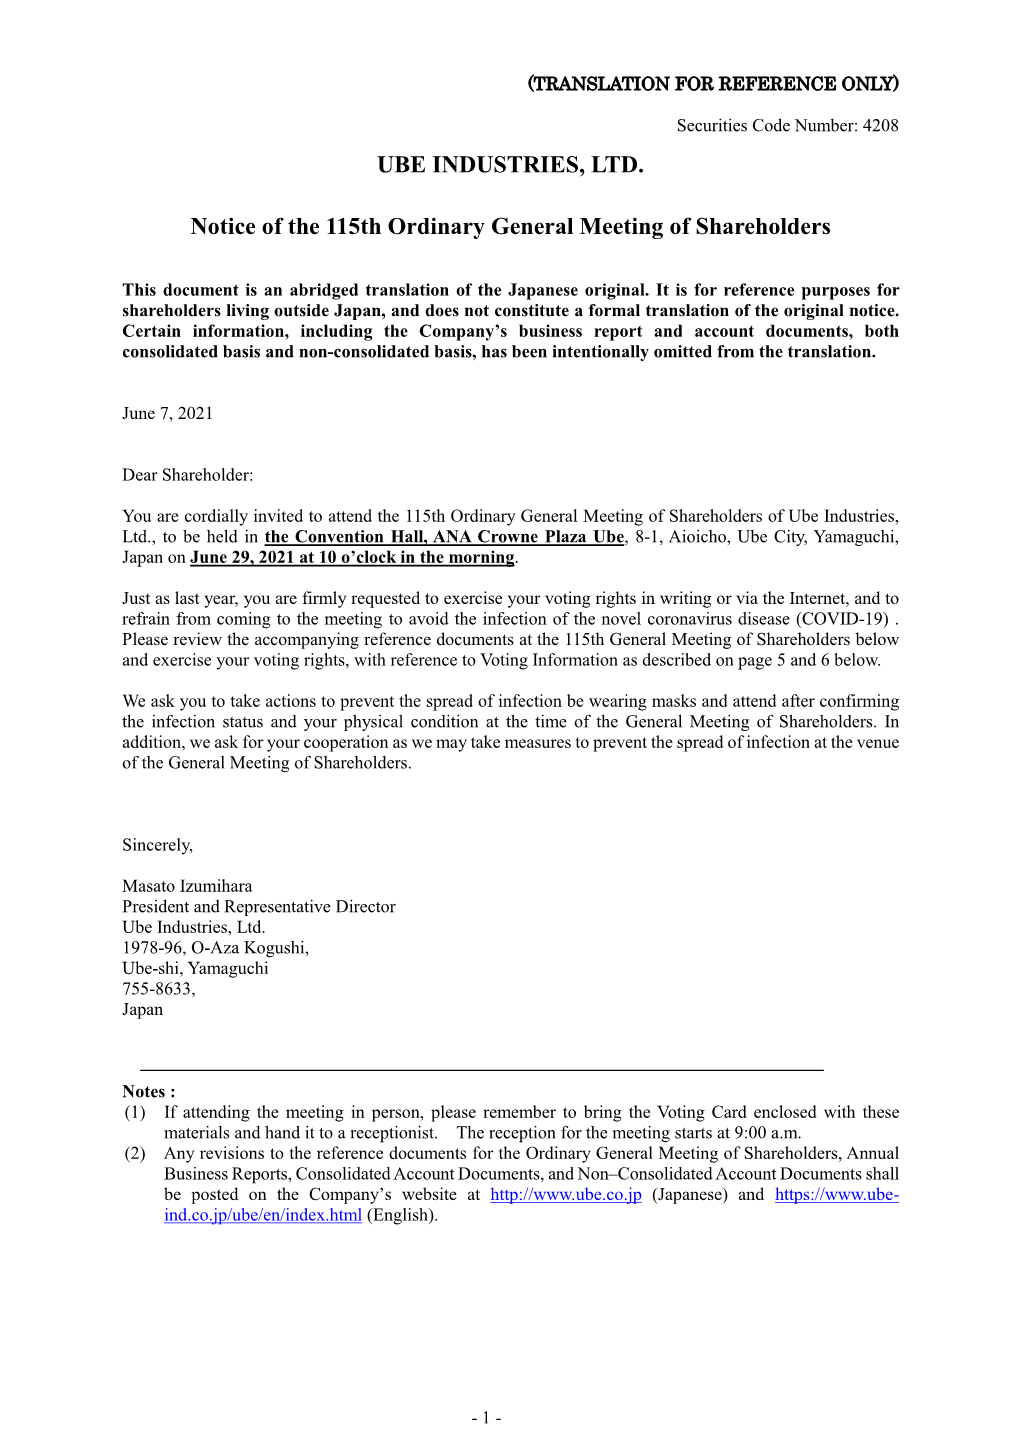 Notice of the 115Th Ordinary General Meeting of Shareholders